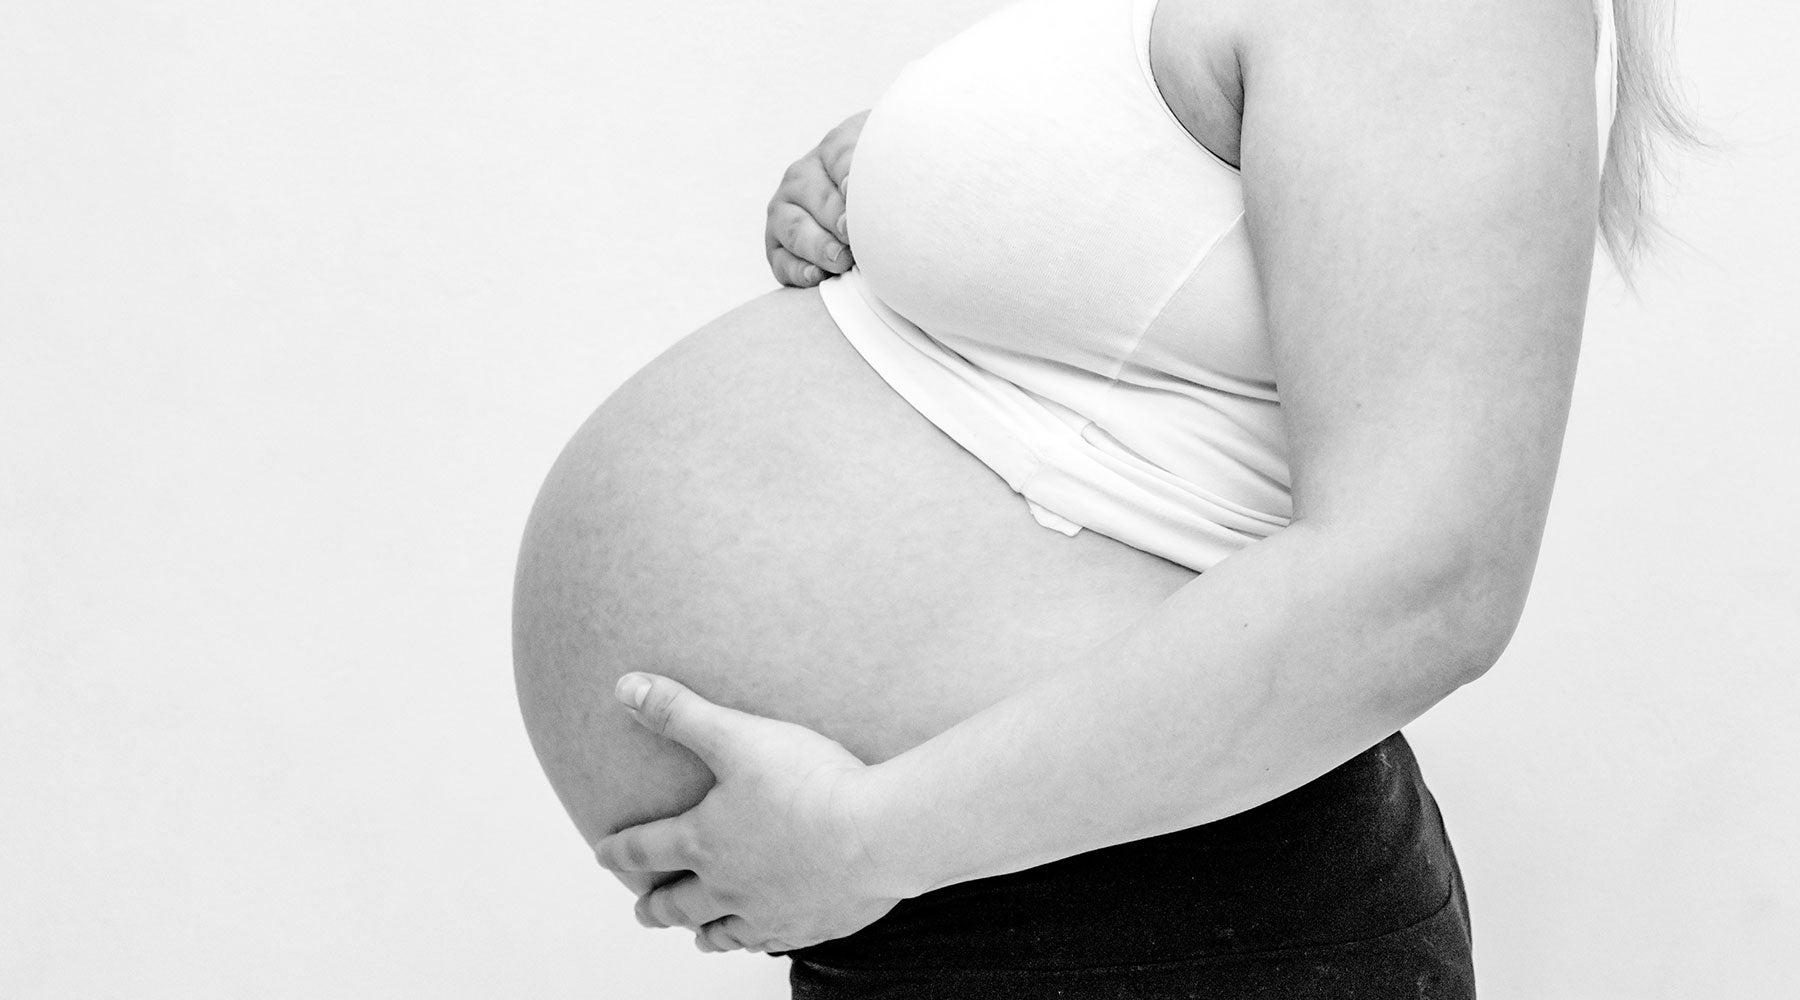 Woman Holding Her Baby Bump